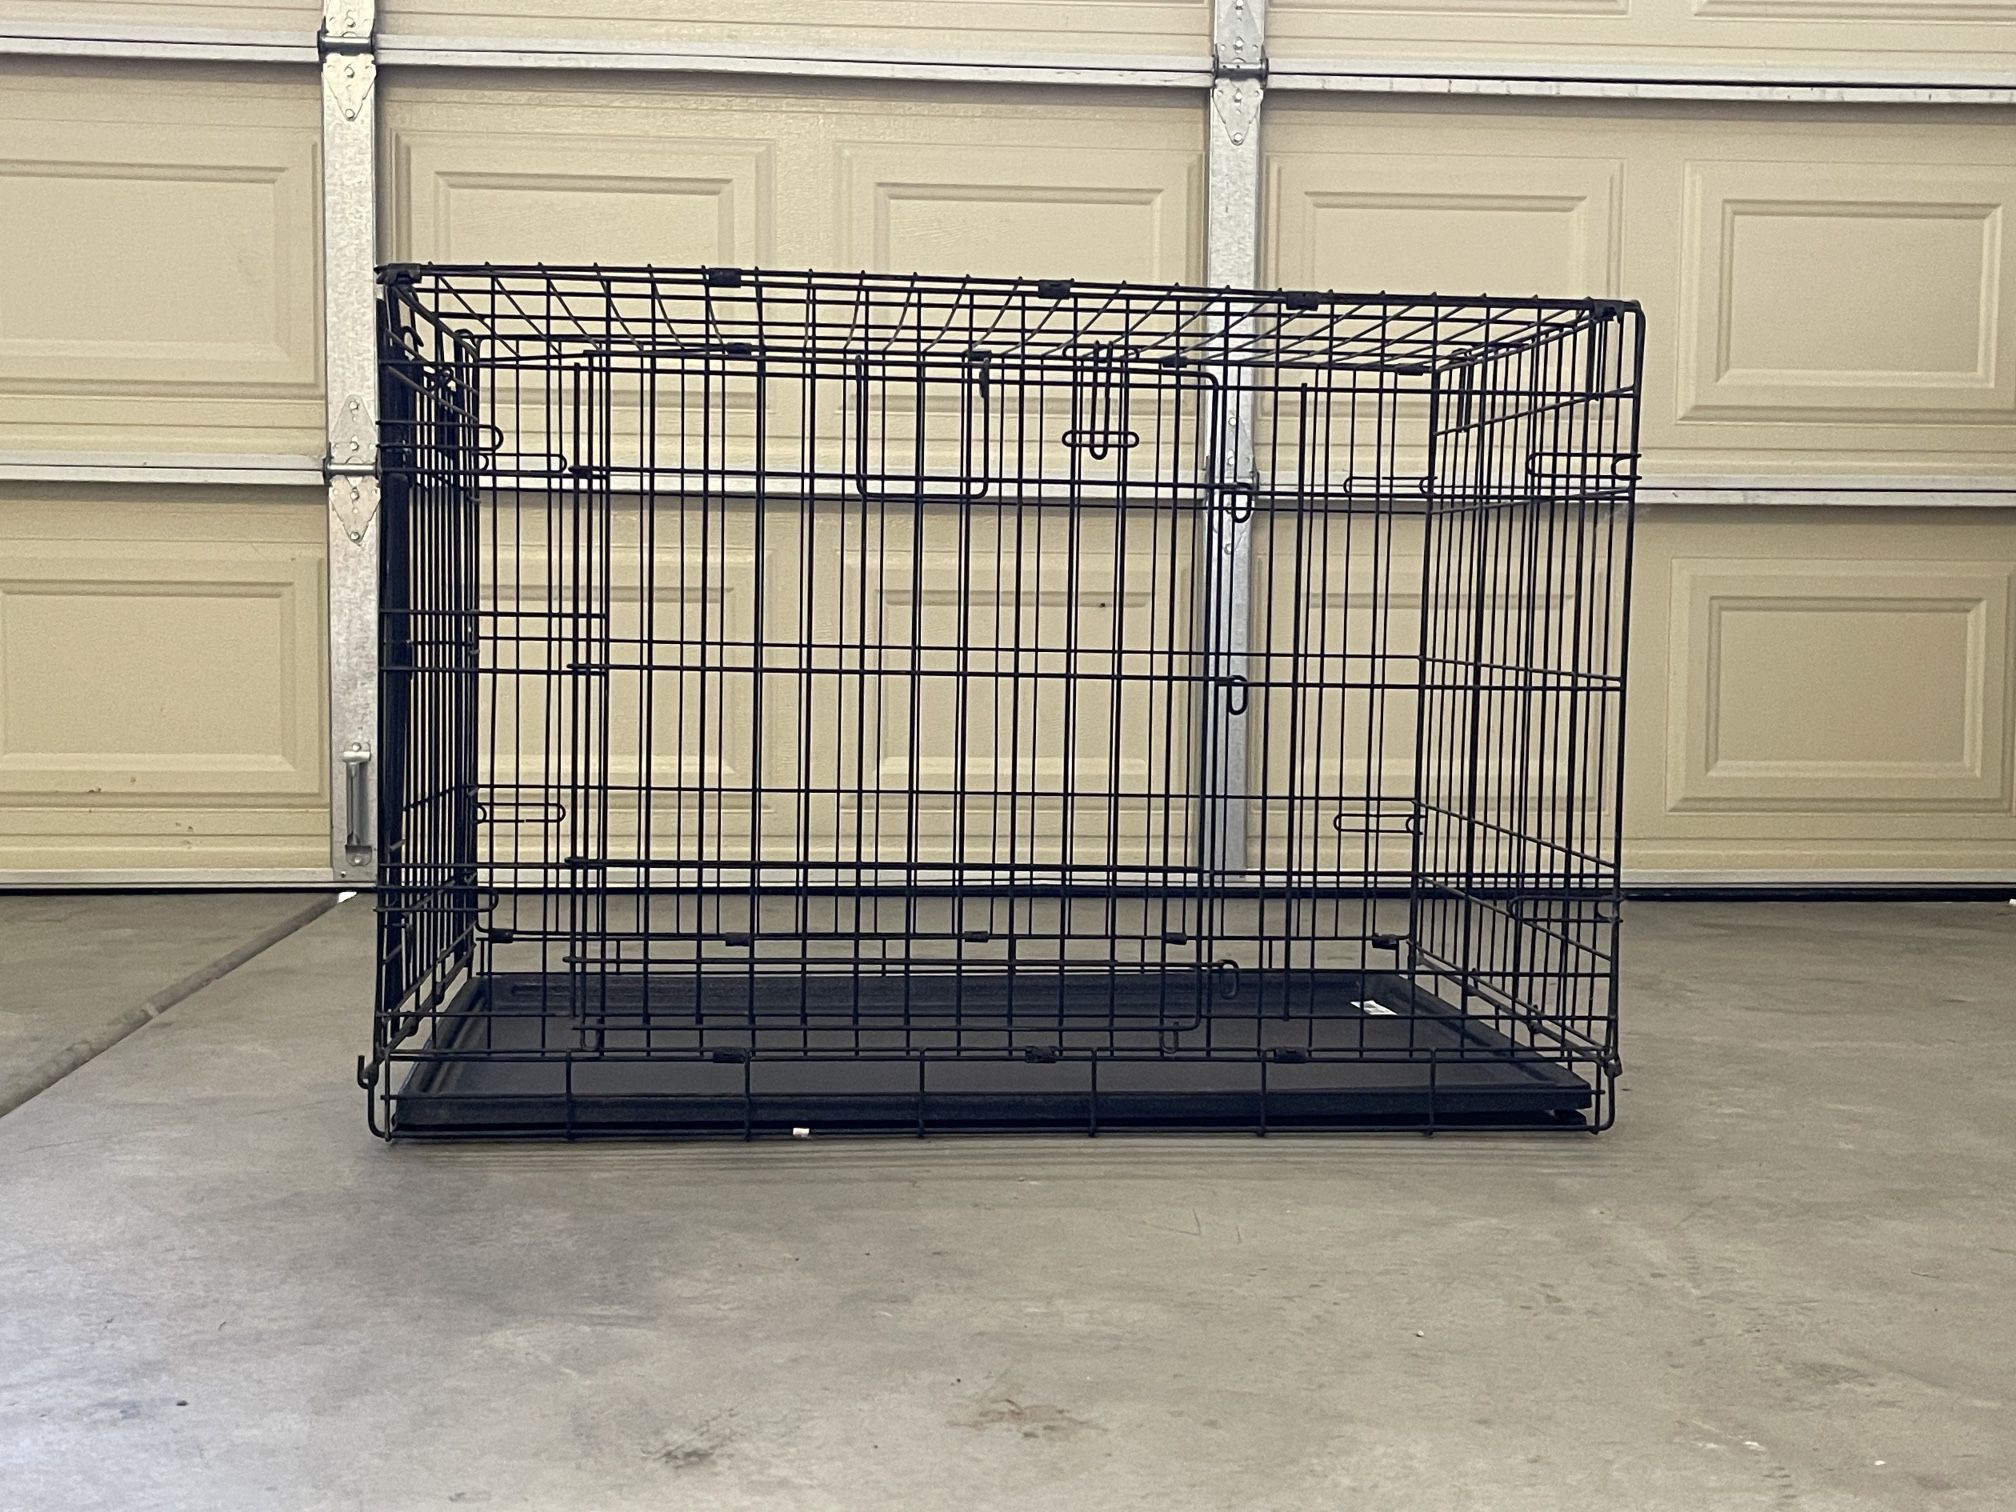 Crate, Kennel, Dog Crate, Carrier